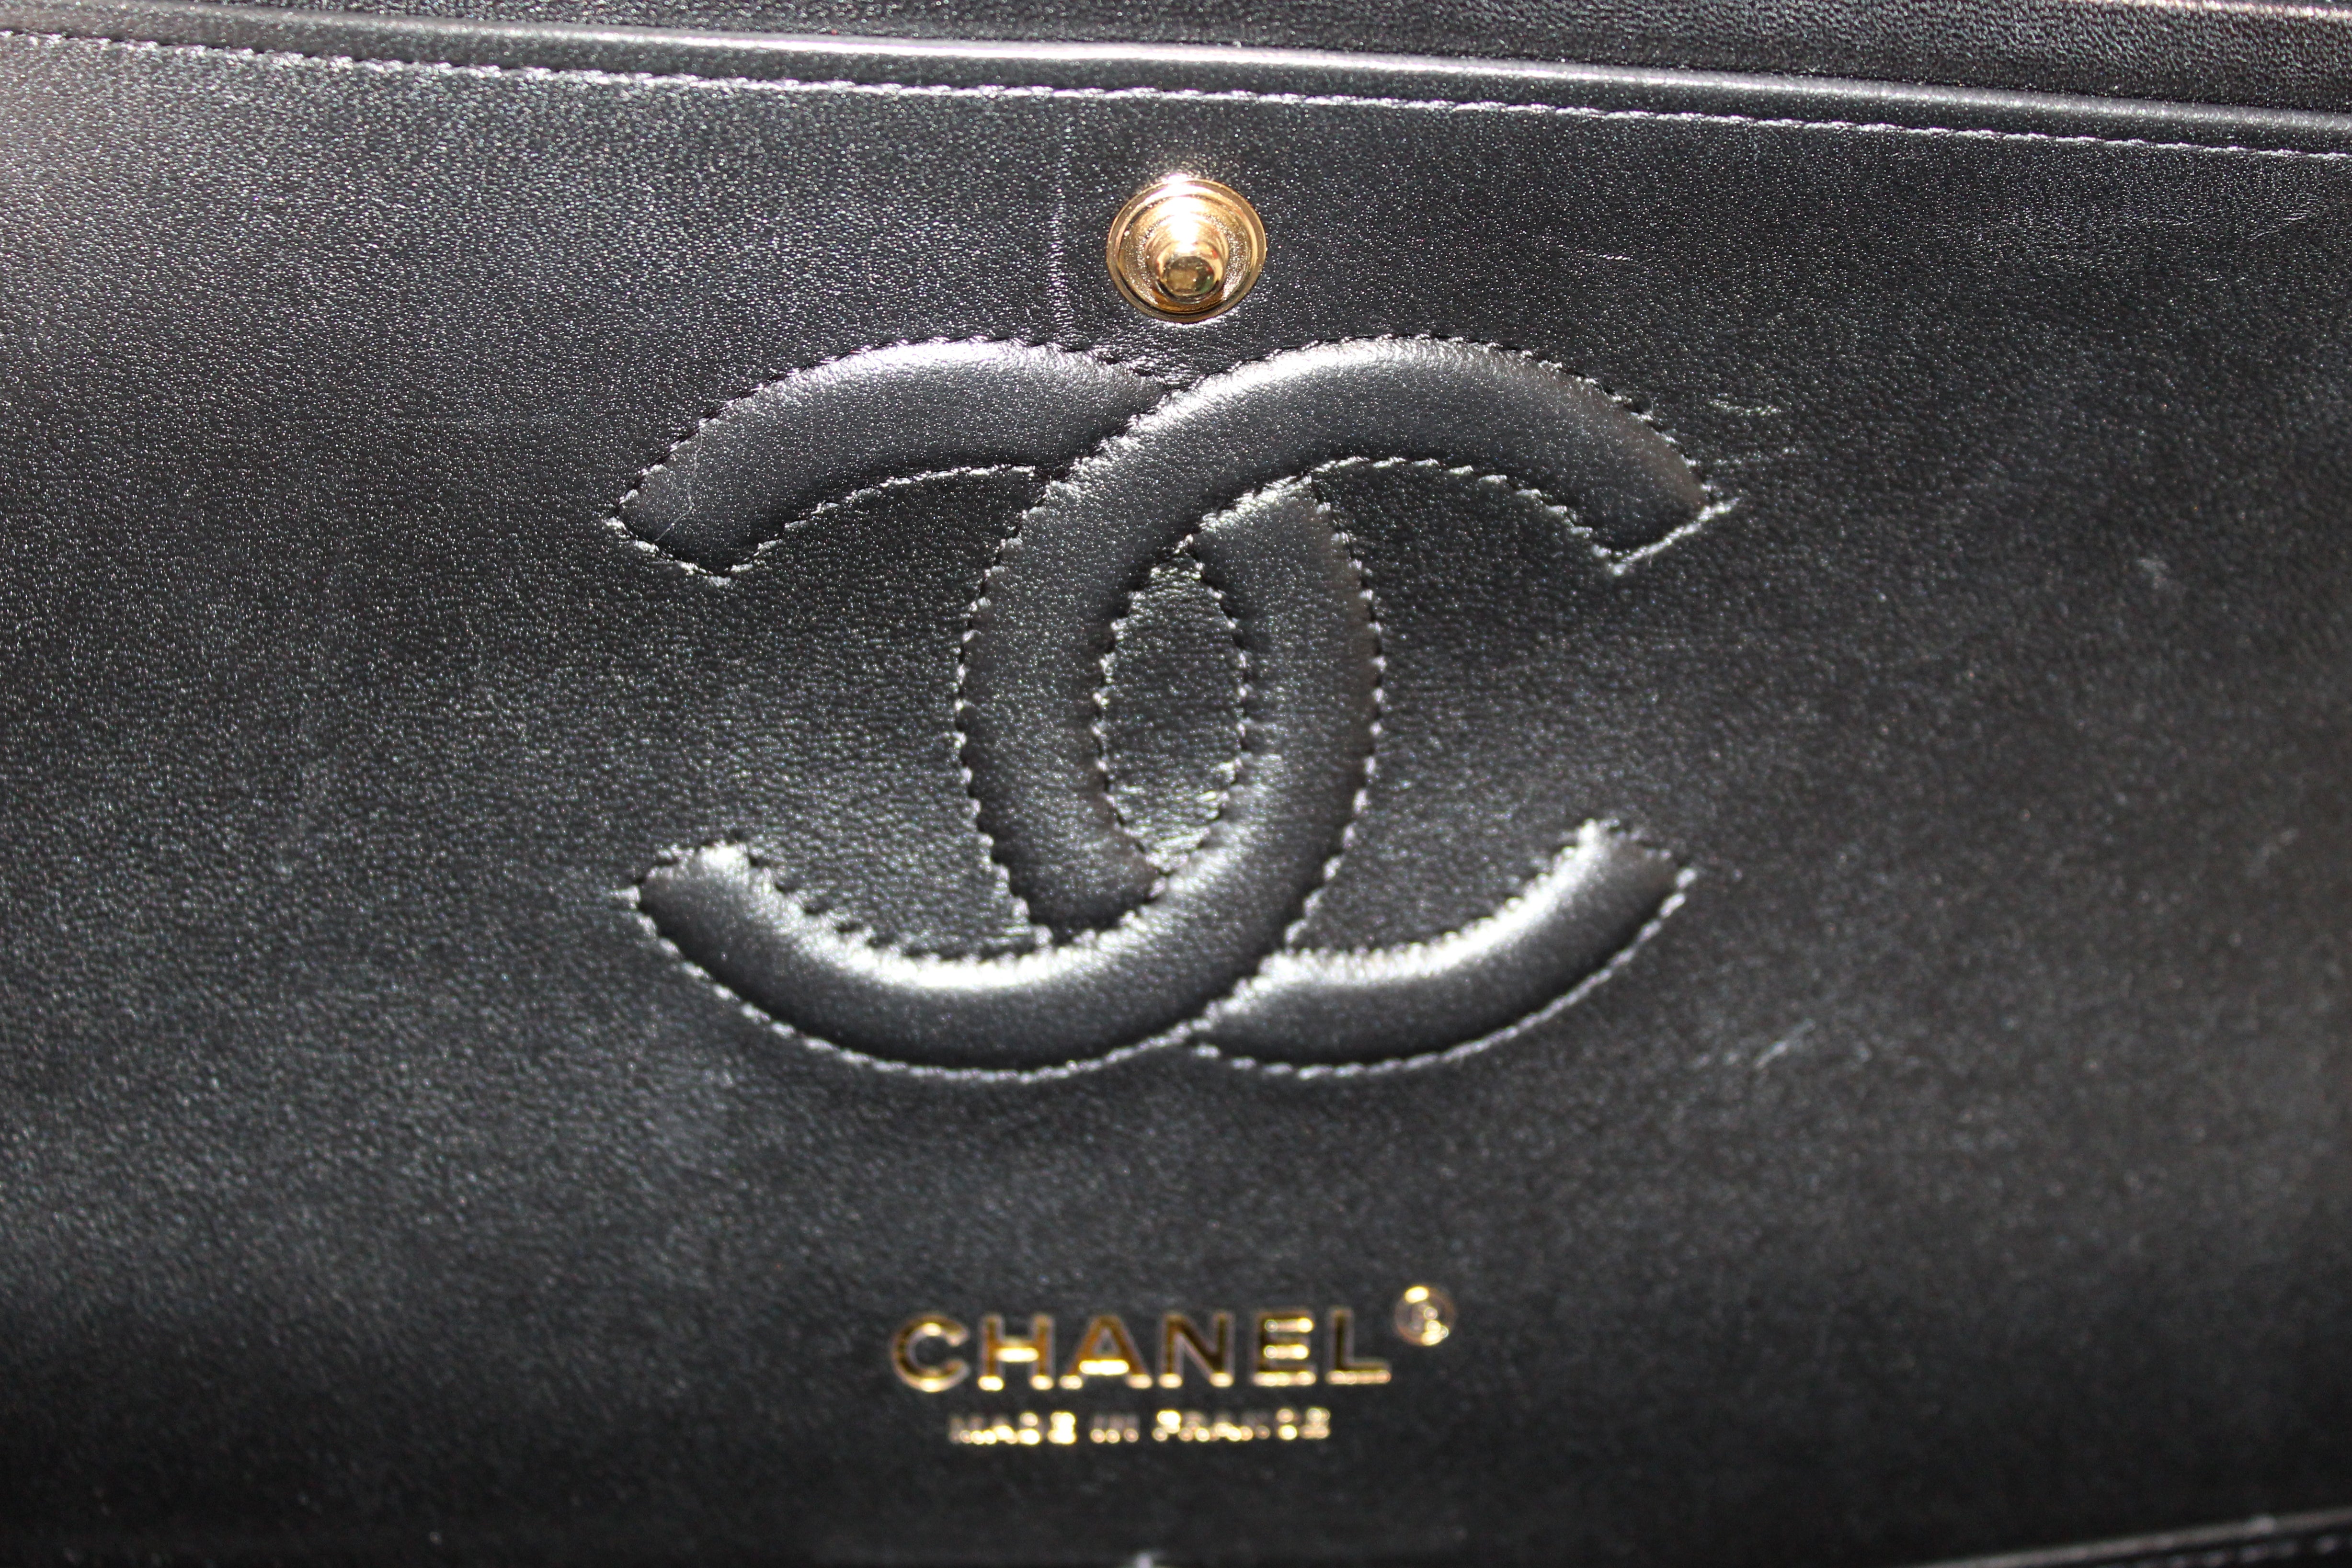 Authentic Chanel Classic Black Quilted Lambskin Leather Classic Medium Double Flap Bag